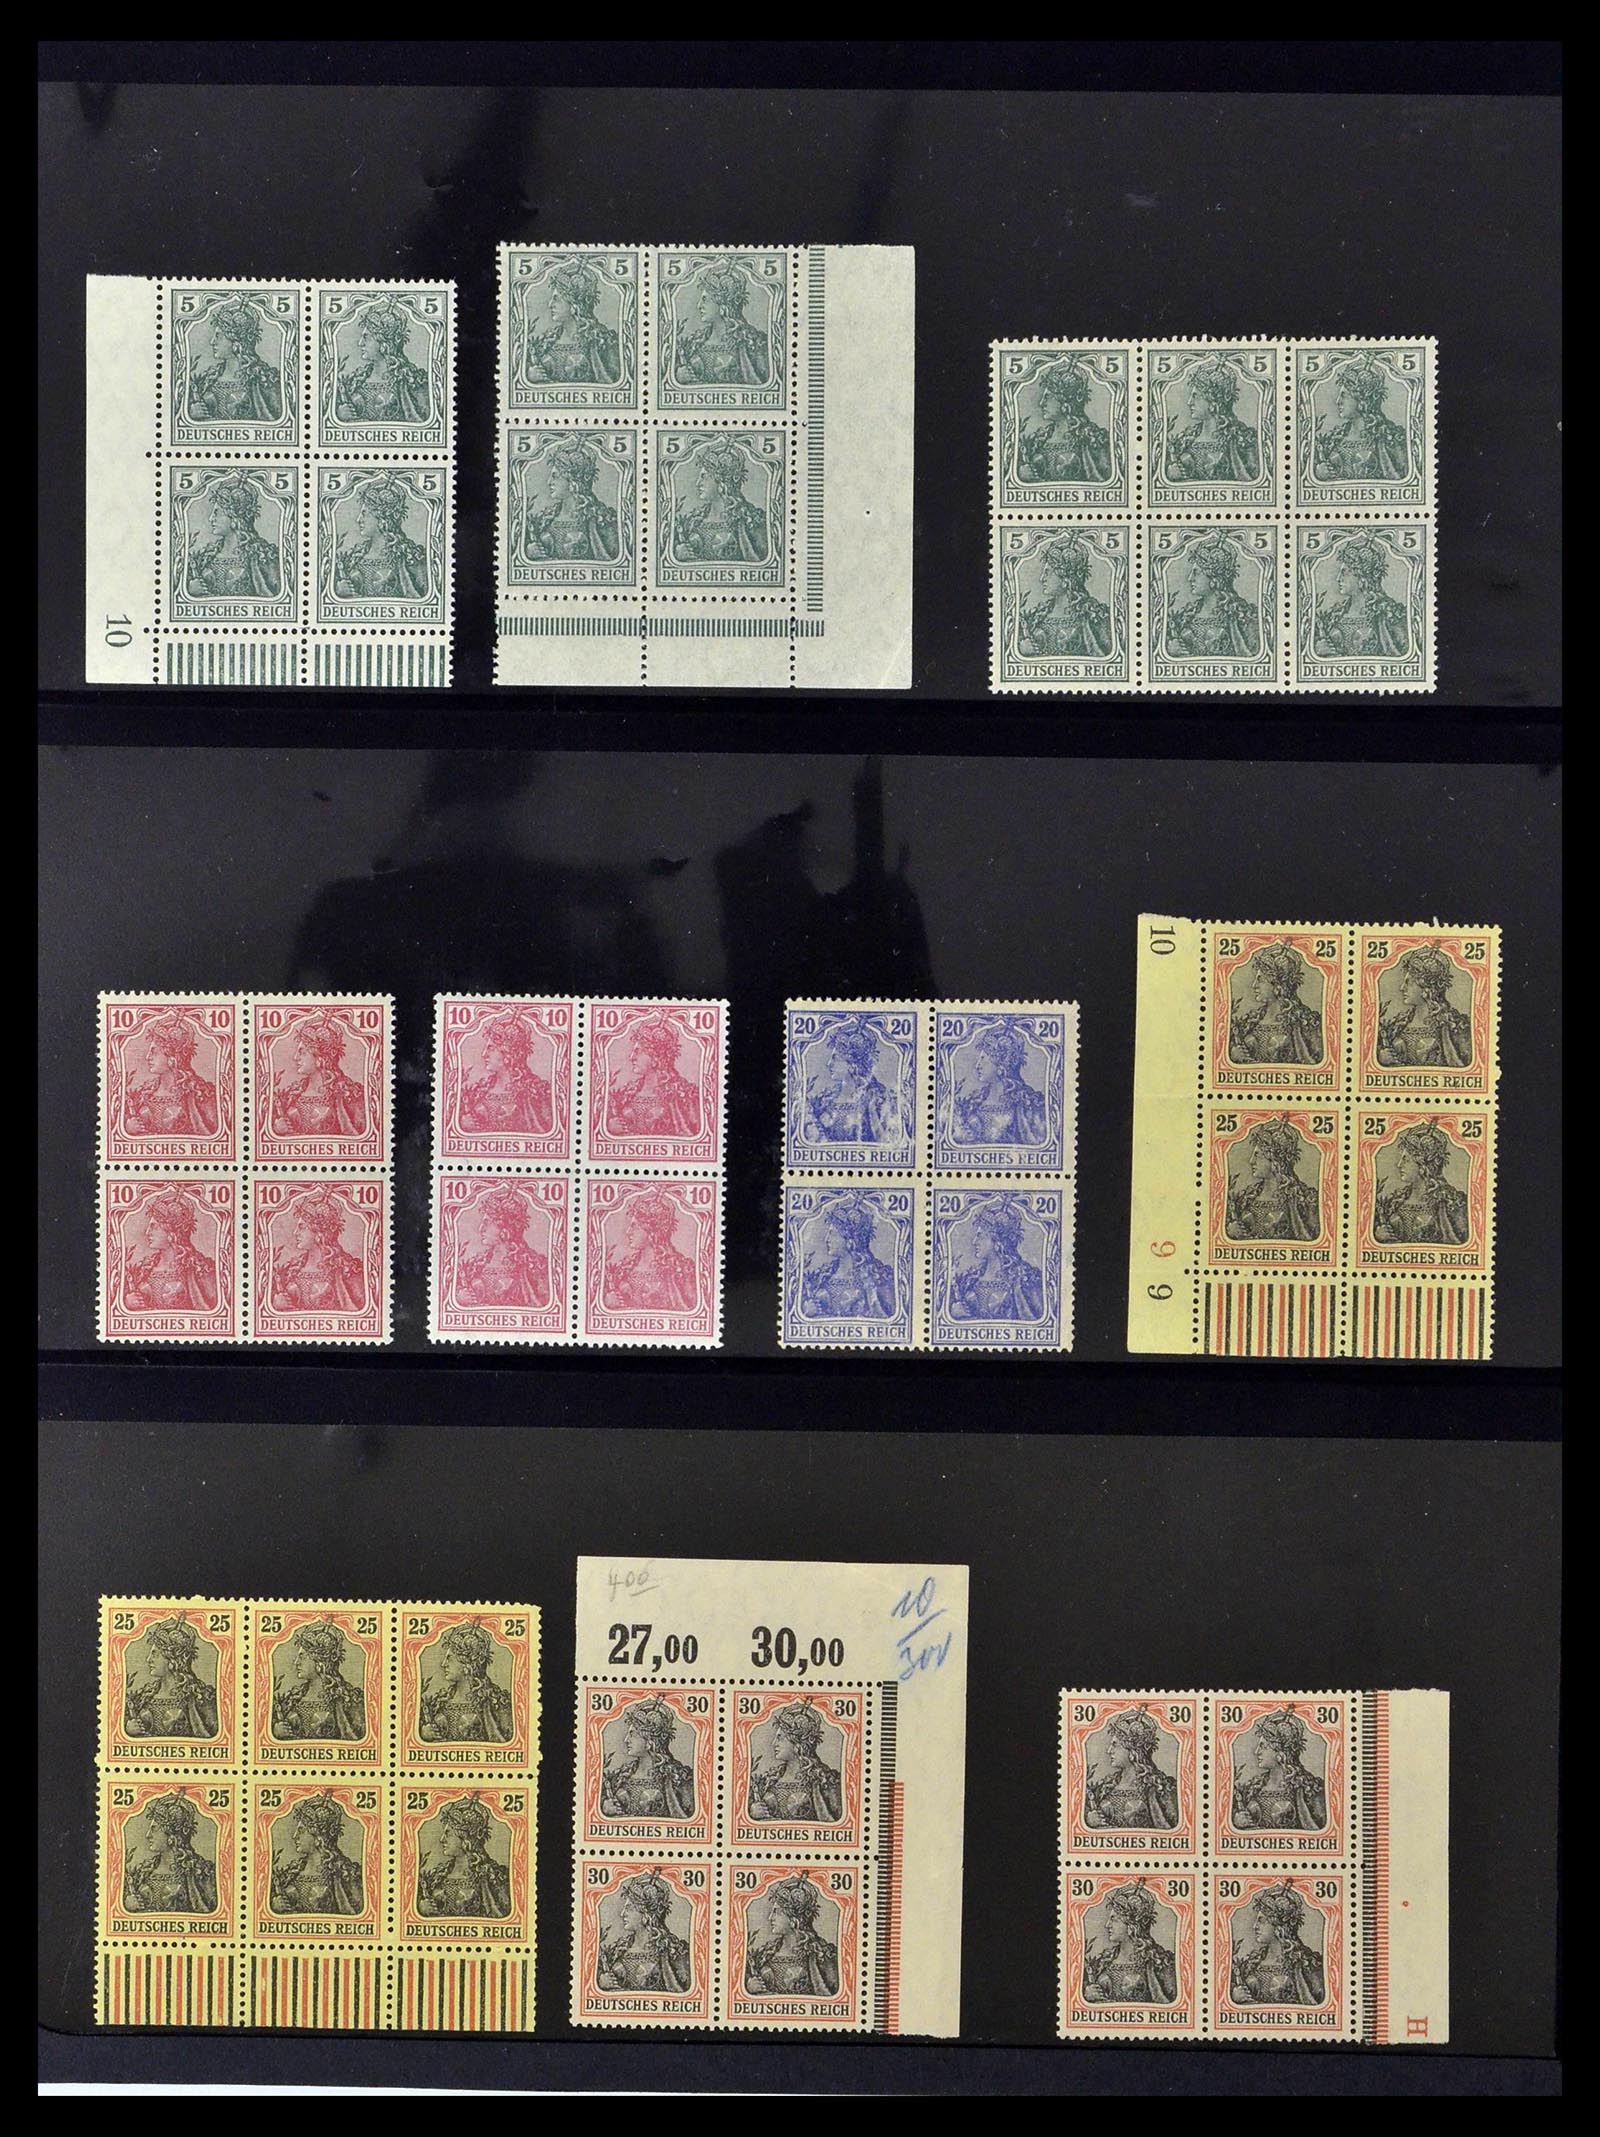 39255 0002 - Stamp collection 39255 German Reich MNH blocks of 4.